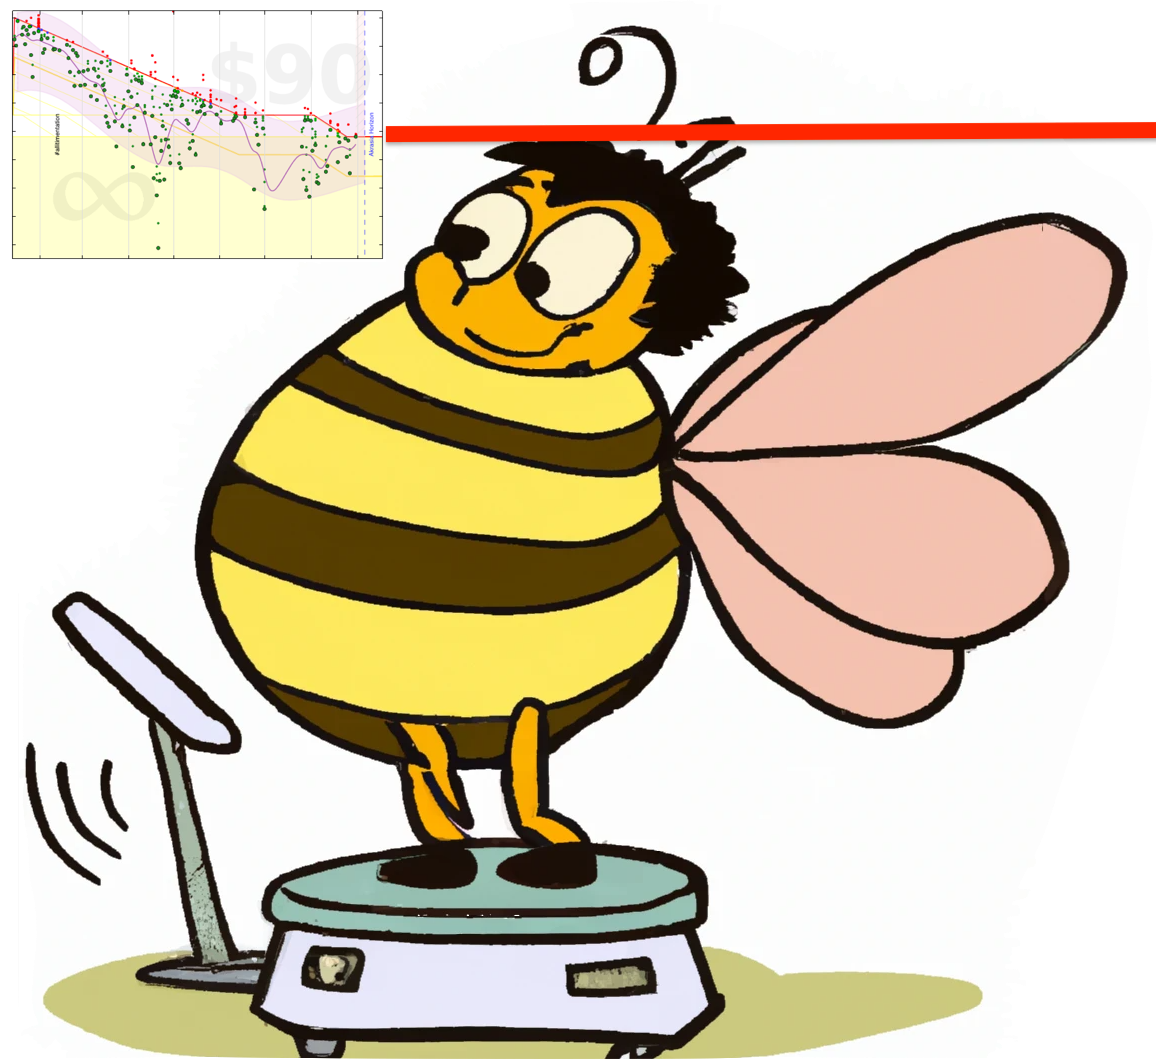 A bee weighing itself, with a graph of its weight